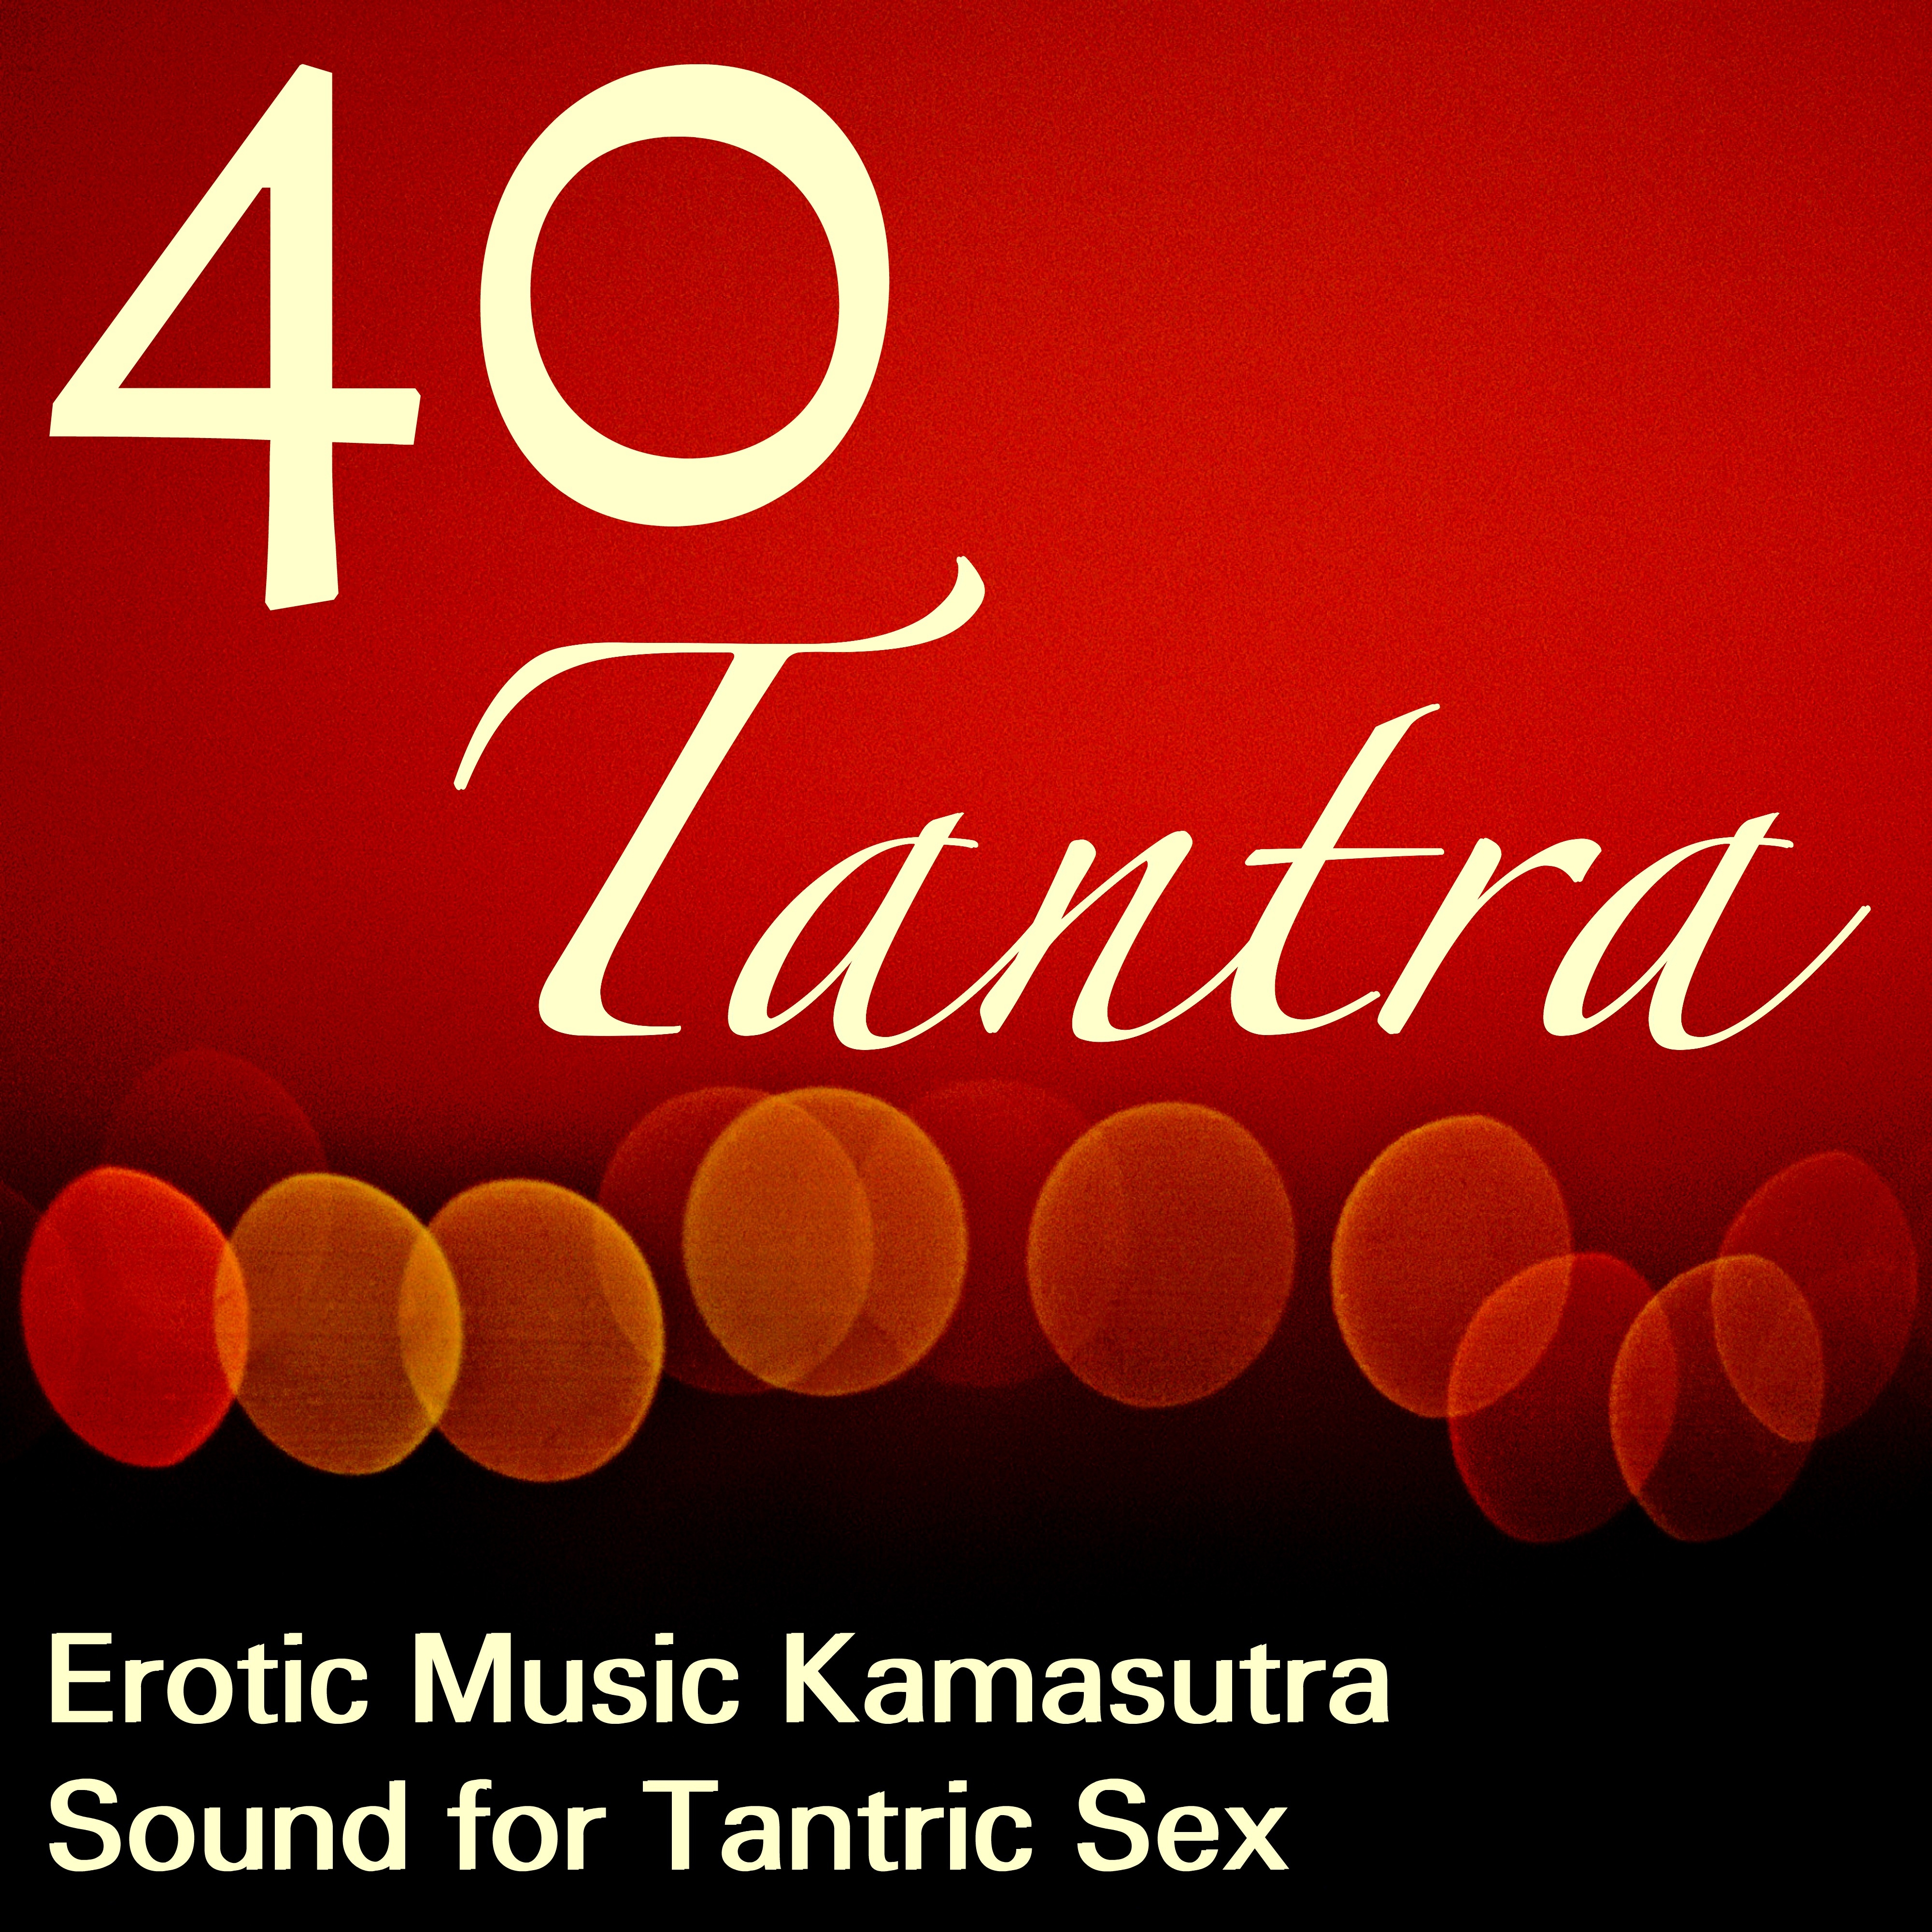 40 Tantra - Erotic Music Kamasutra Sound for Tantric Sex